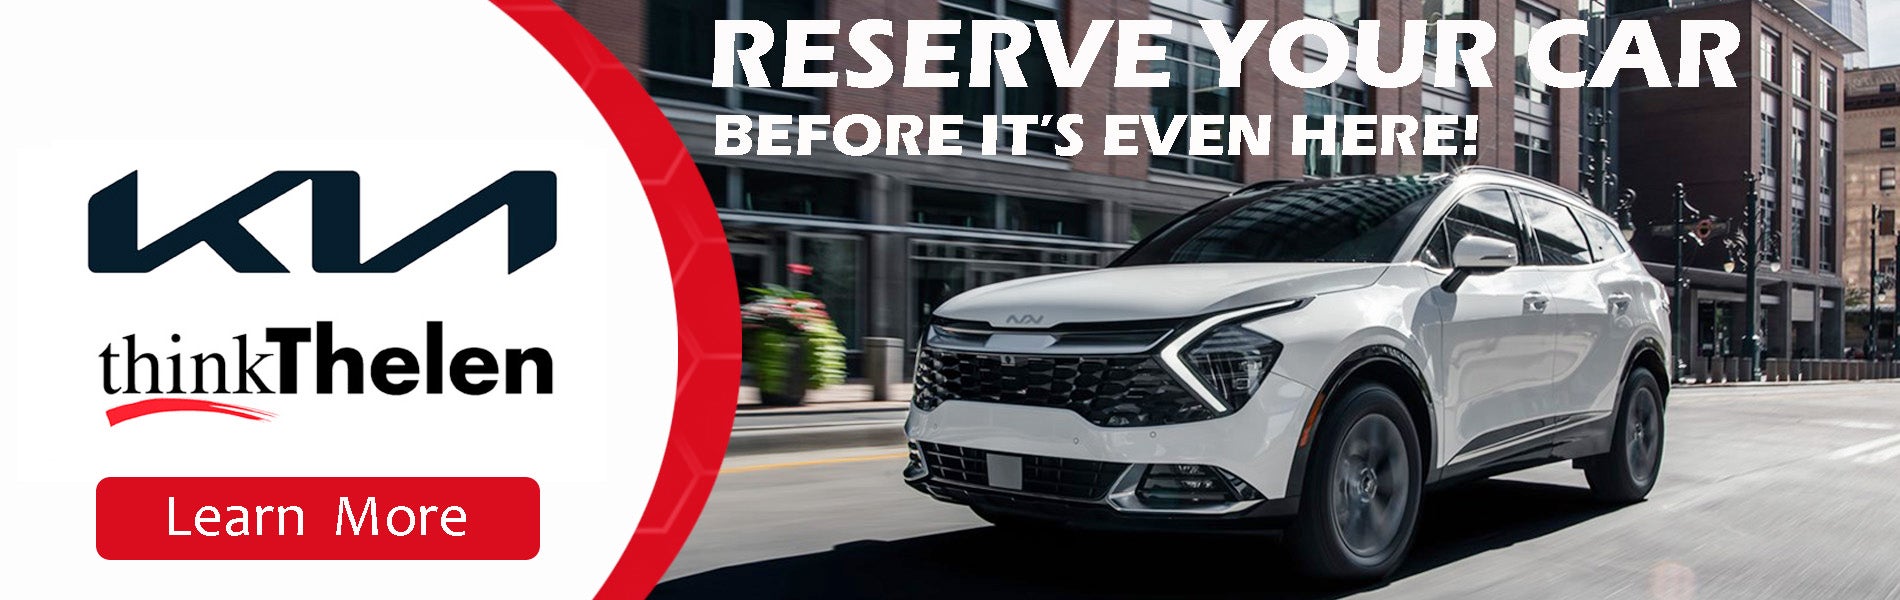 Reserve your Kia before it's even here!